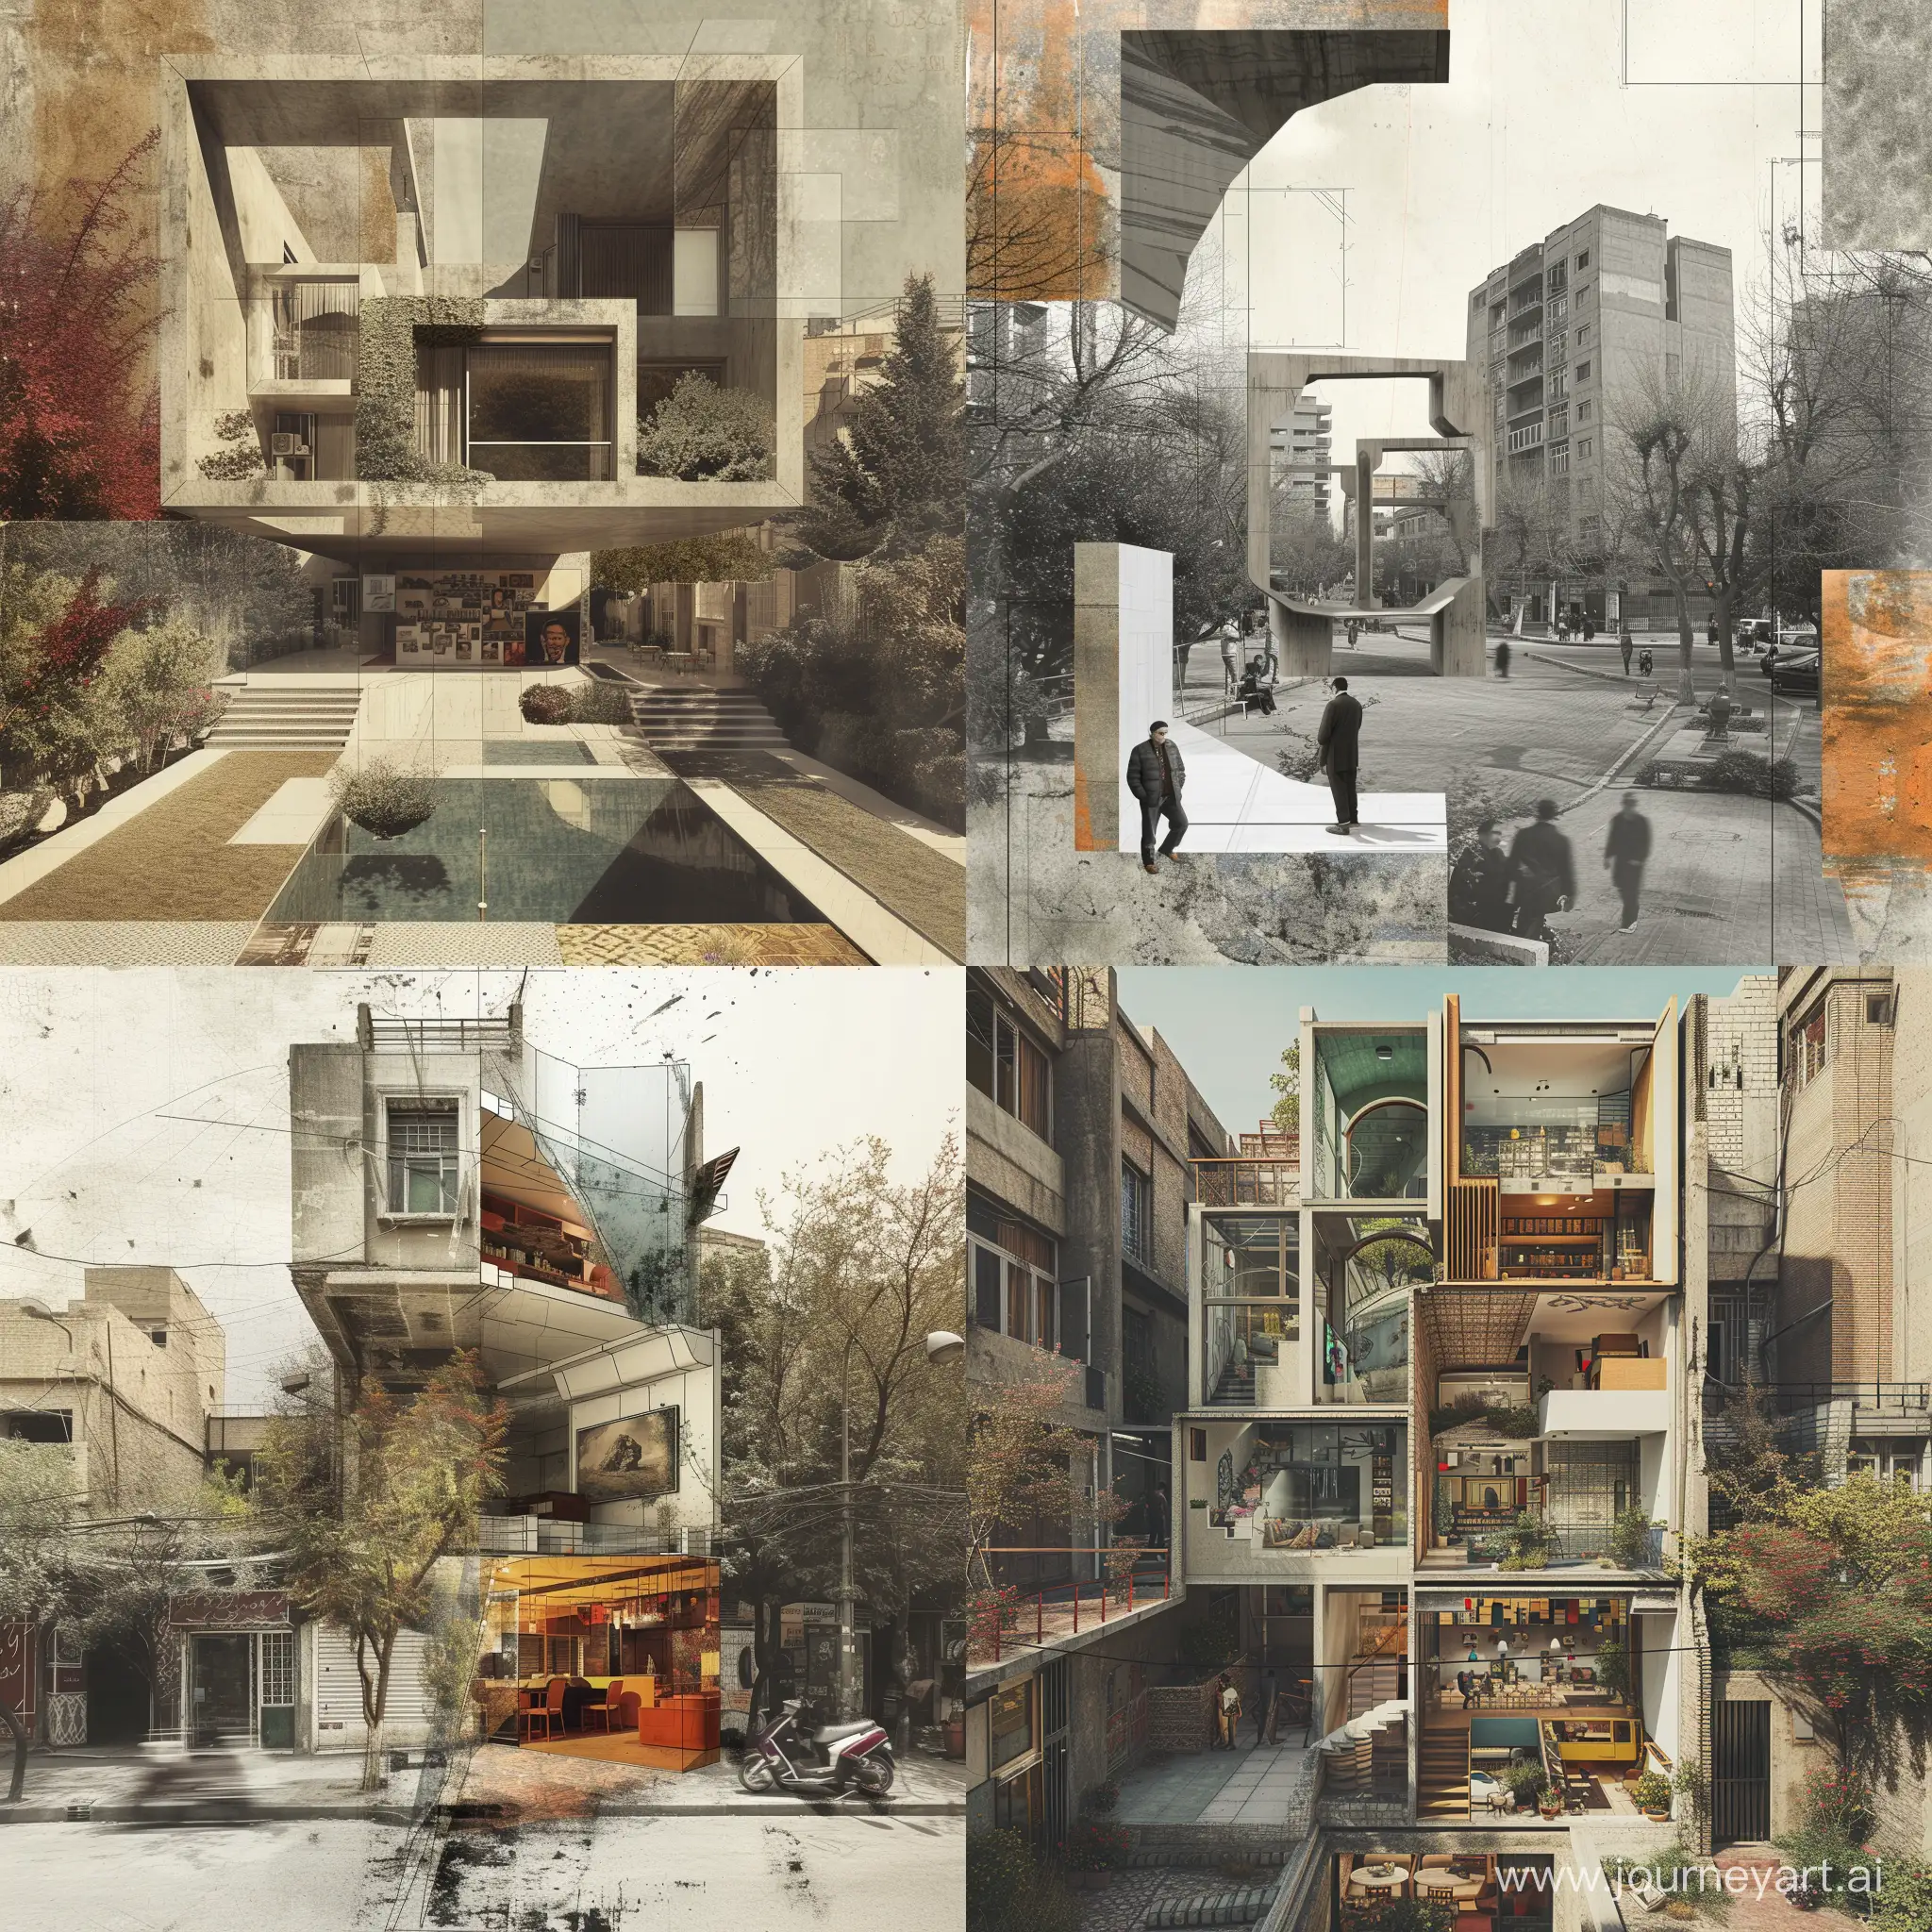 Imaginary-Architectural-Collage-in-Tehrans-Real-Urban-Landscape